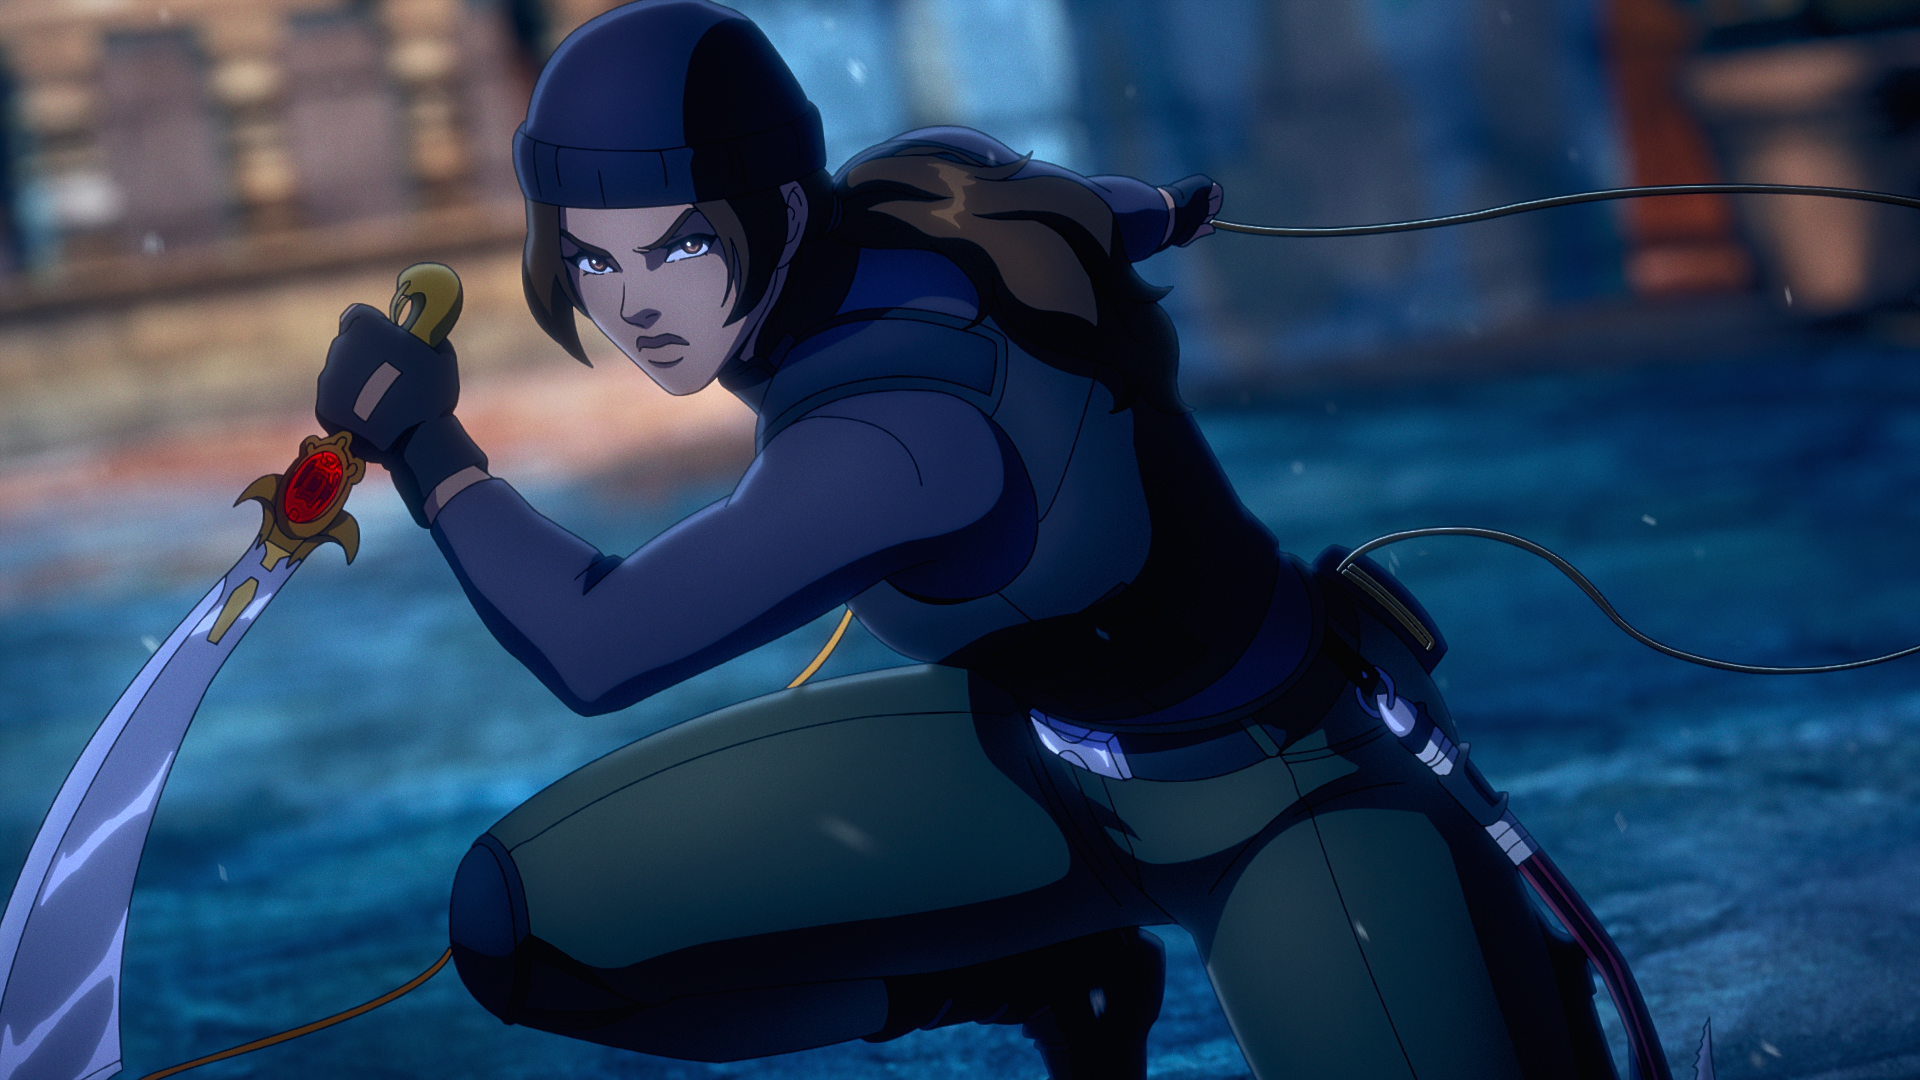 Lara Croft, wearing a stealthy black suit, holds a scimitar in her right hand as she crouches ready to strike in a still from the Tomb Raider: The Legend of Lara Croft animated series